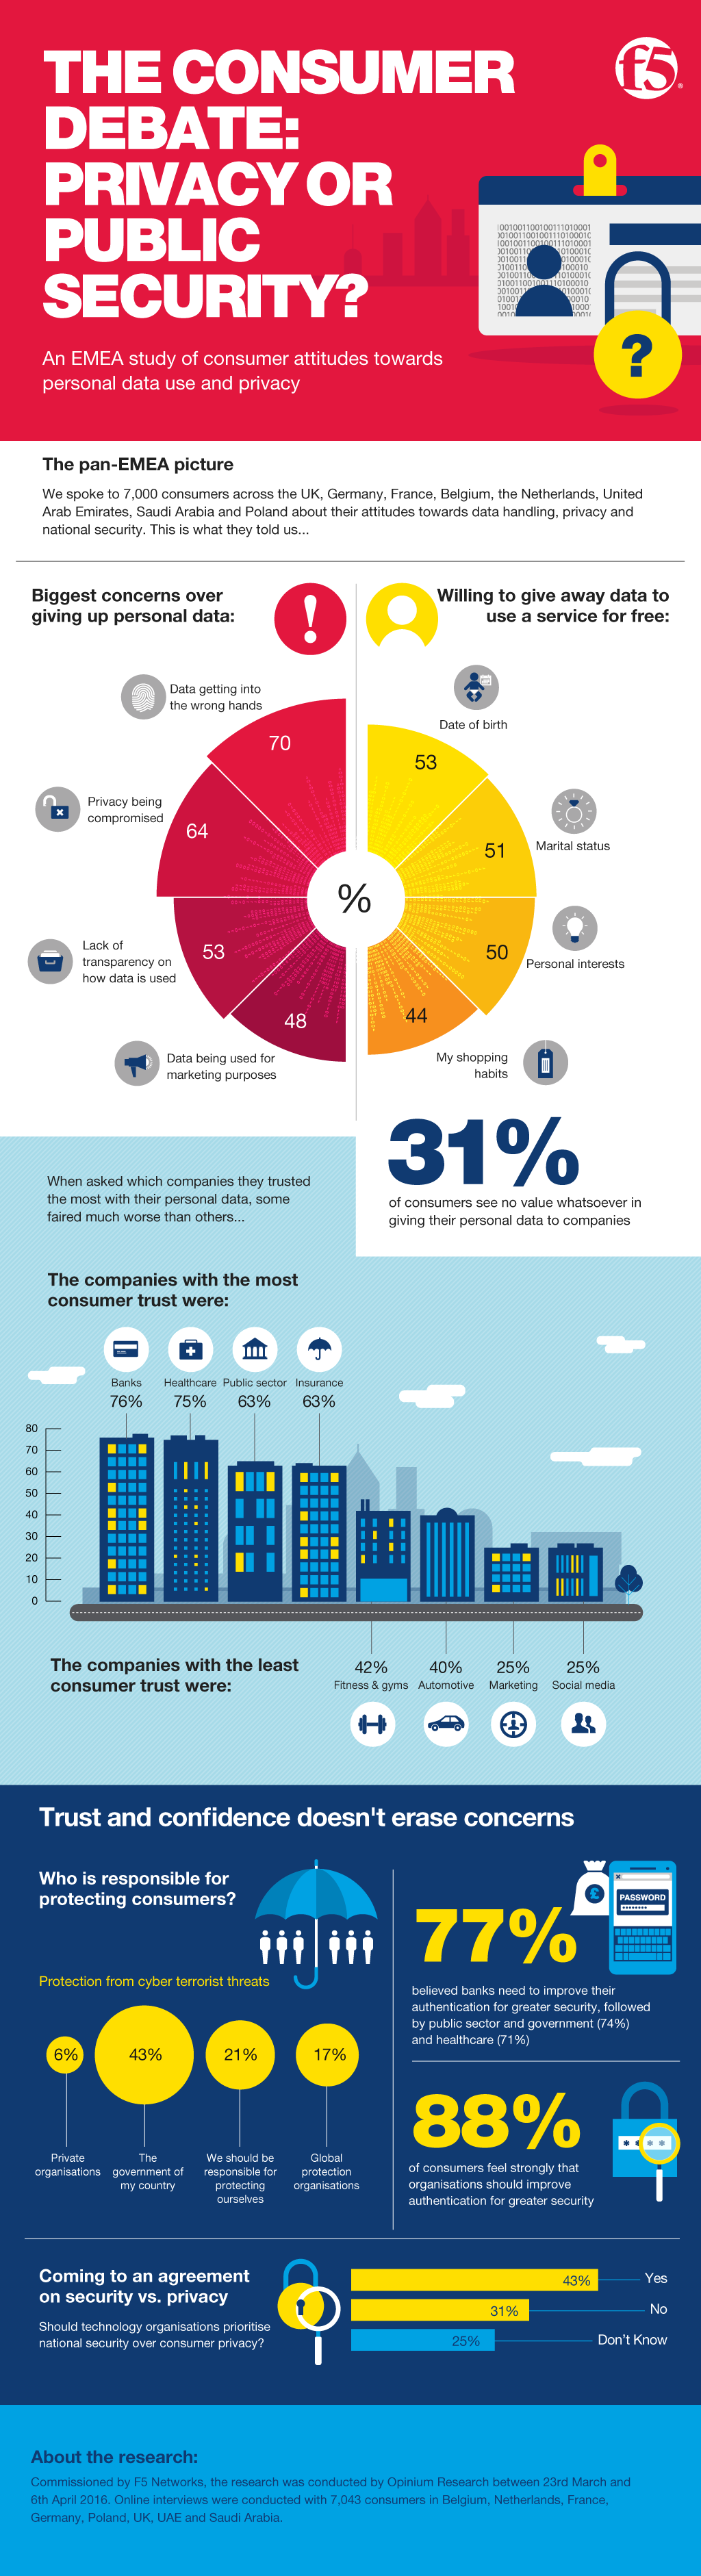 Infographic: A Consumer Debate: Privacy or Public Security